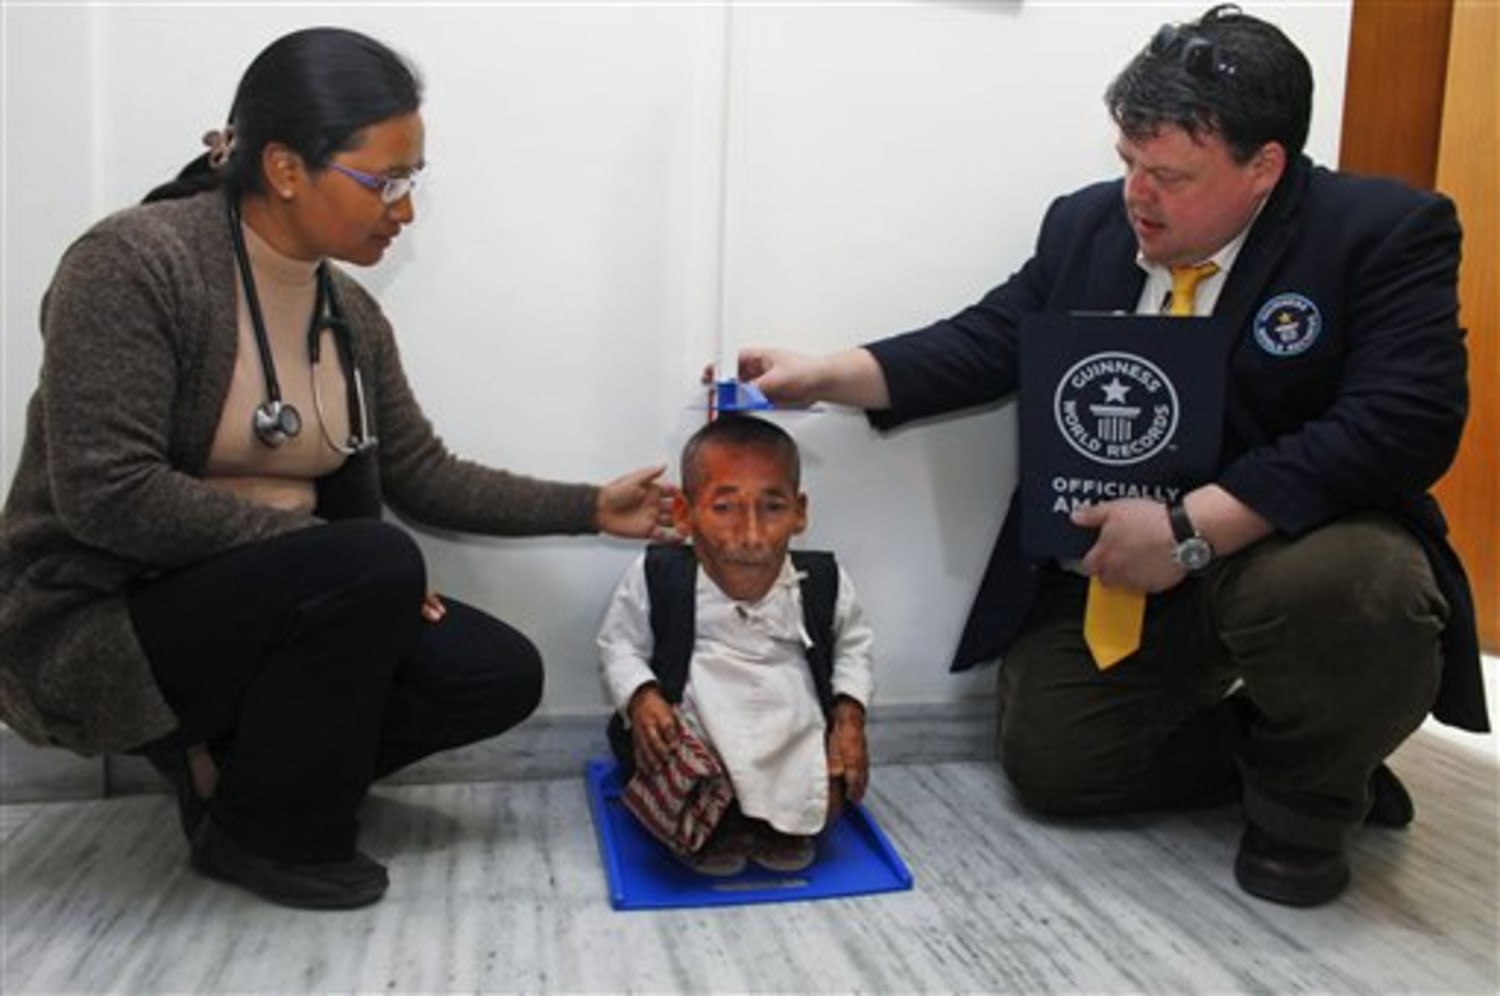 Guinness World Records declares Nepalese man the world's shortest at 21.5  inches - The Washington Post